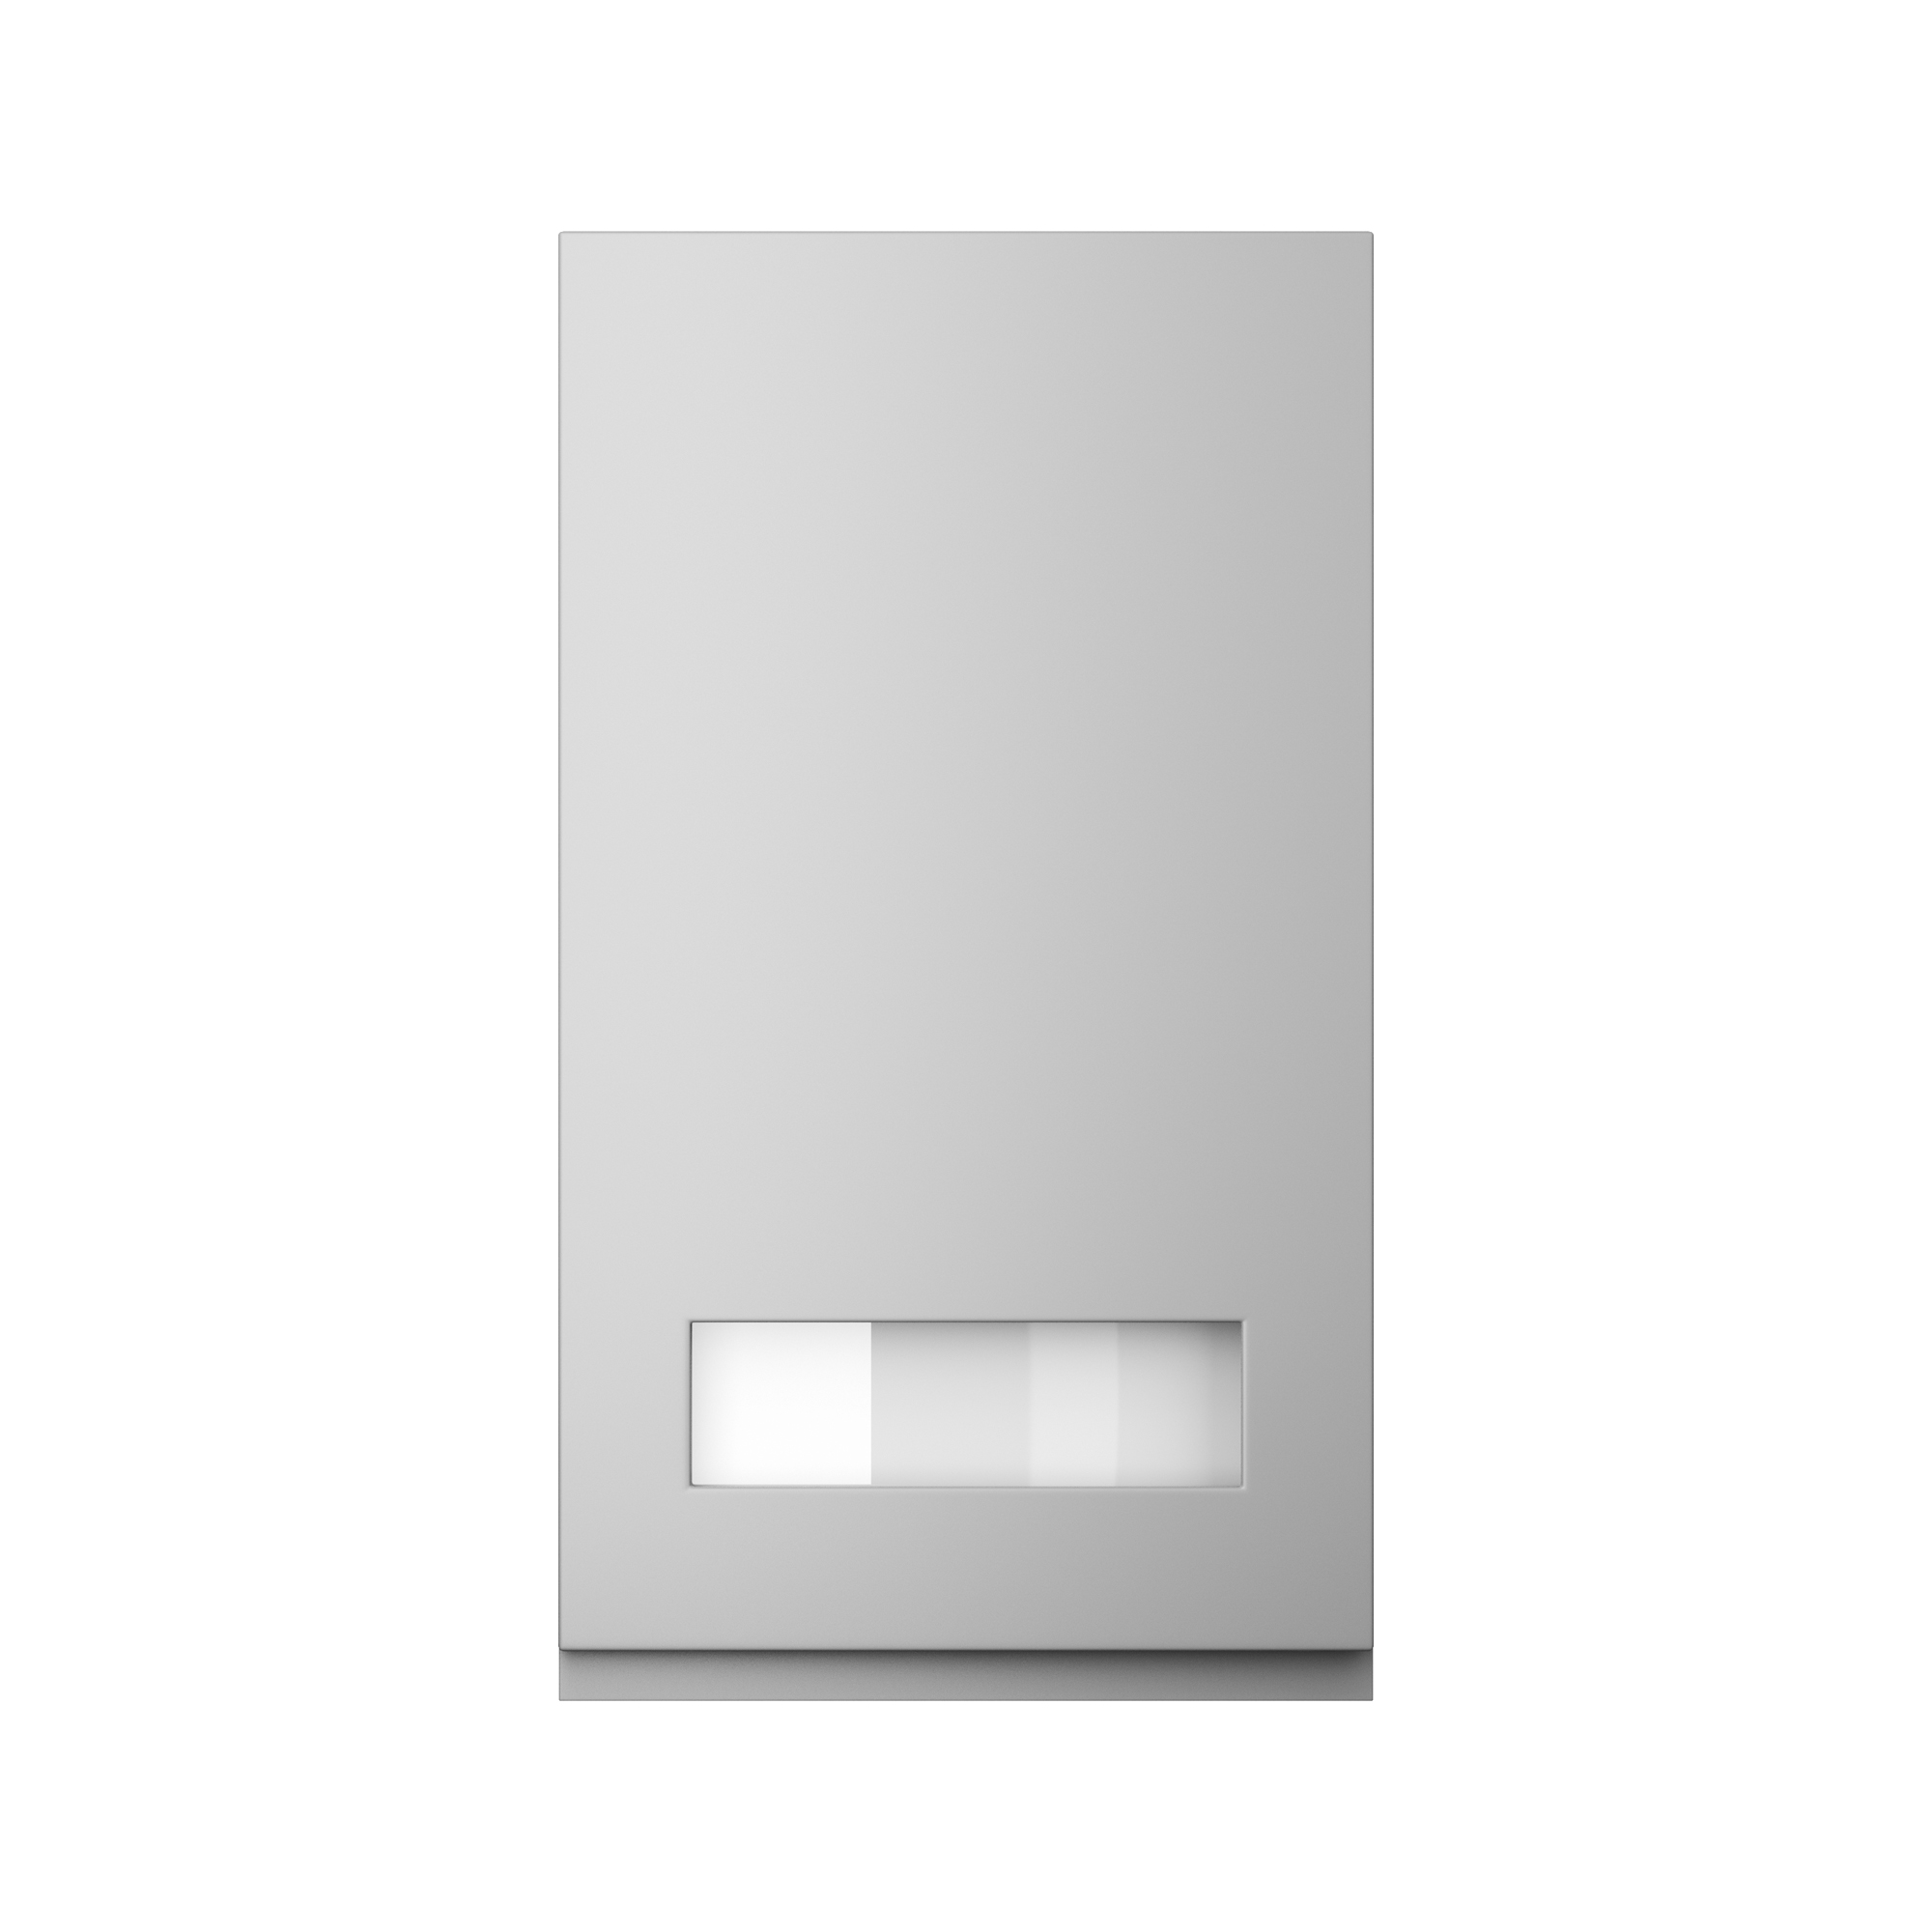 355 X 997 Letterbox Frame Includes Clear Glass - Strada Dust Grey Gloss